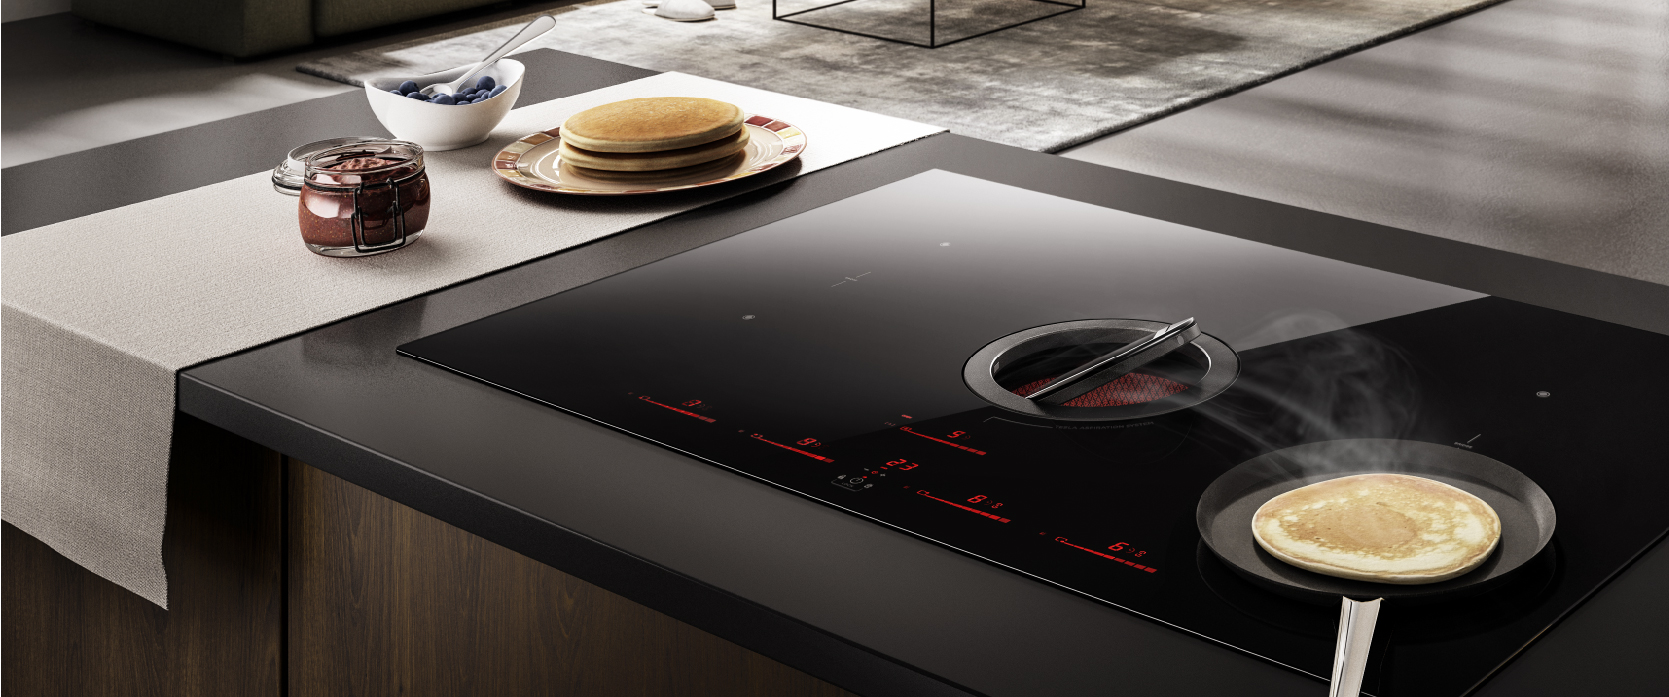 Advantages of cooking with an induction cooktop